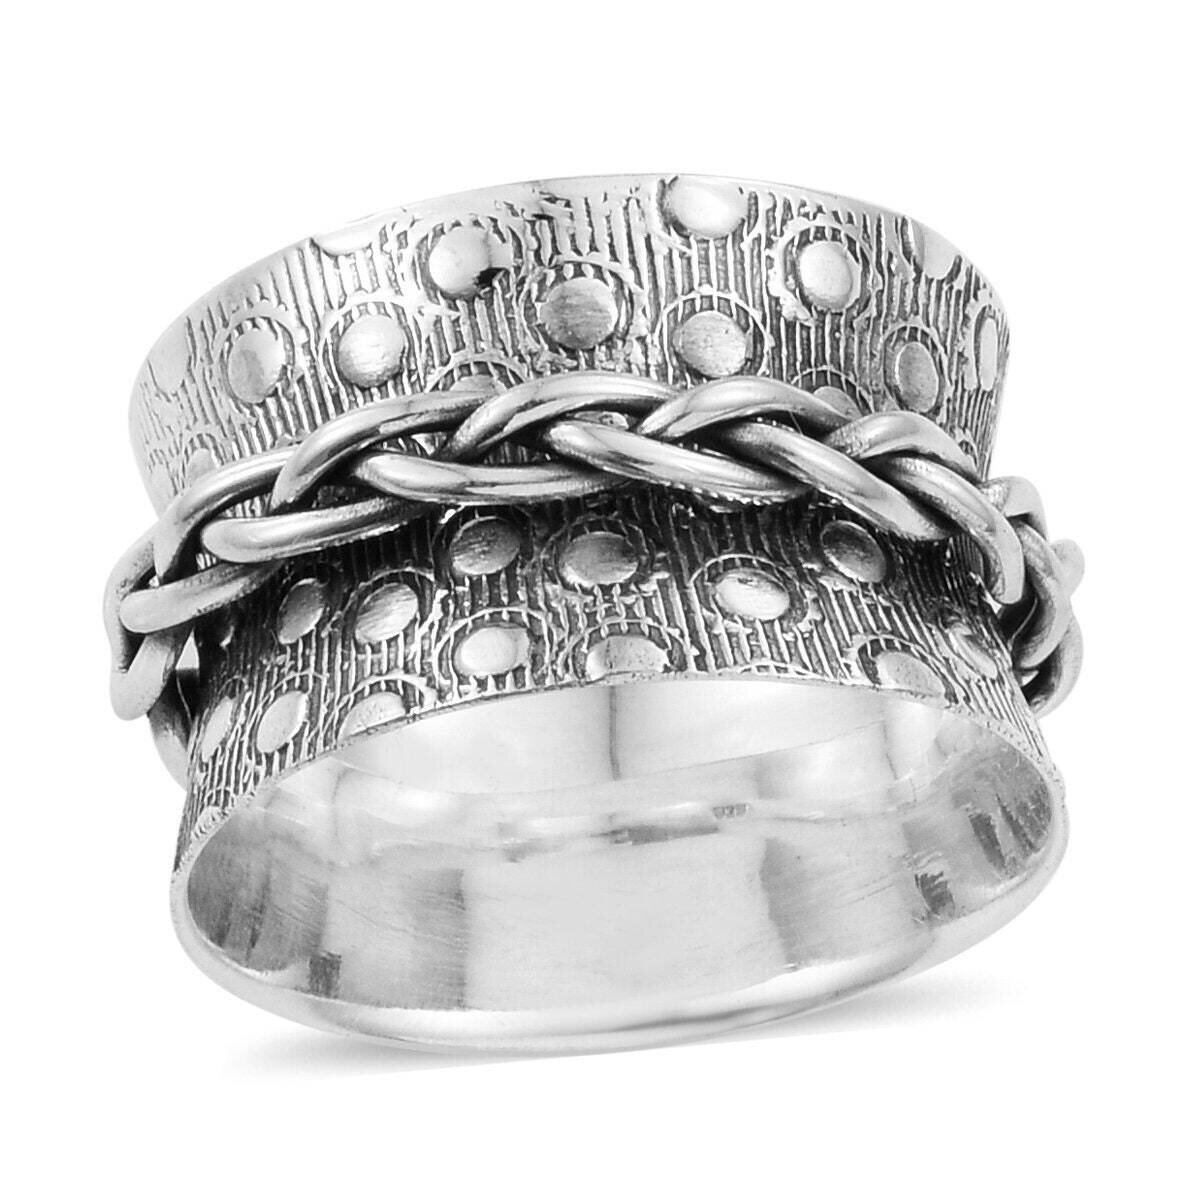 Thumb Ring 925-Sterling Silver Ring,Antique Silver Ring,Spinner Ring,Solid Silver Ring Gift Item Ring,Spinner Hot Ring Gift For HerCyber2021